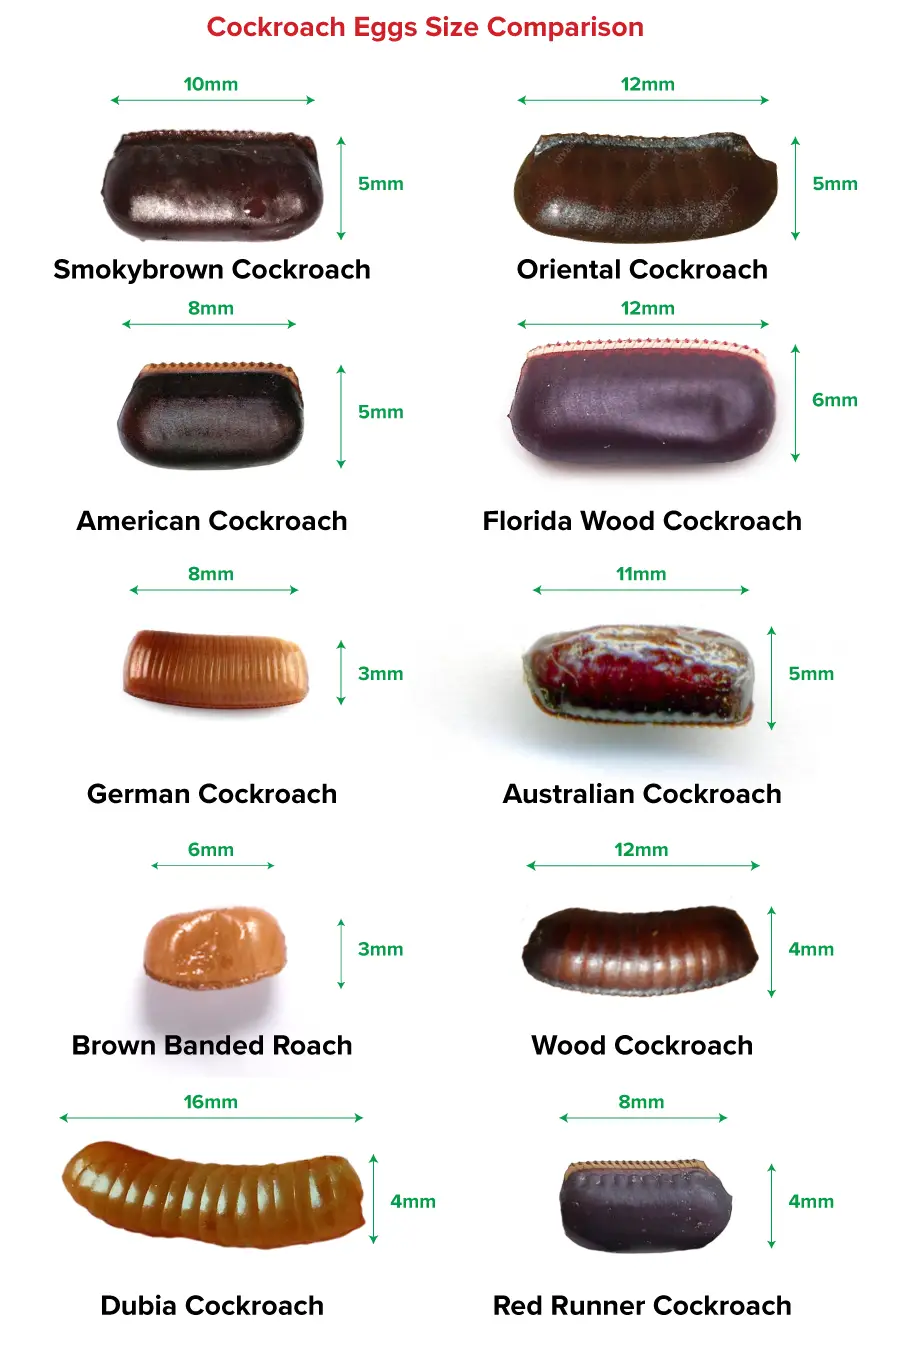 An image showing size comparison of cockroach eggs. The image has eggs of smoky brown cockroach, oriental cockroach, American cockroach, Florida wood cockroach, German cockroach, Australian Cockroach, Brown Banded Roach, Wood Roach, Dubia Roach and Red Runner